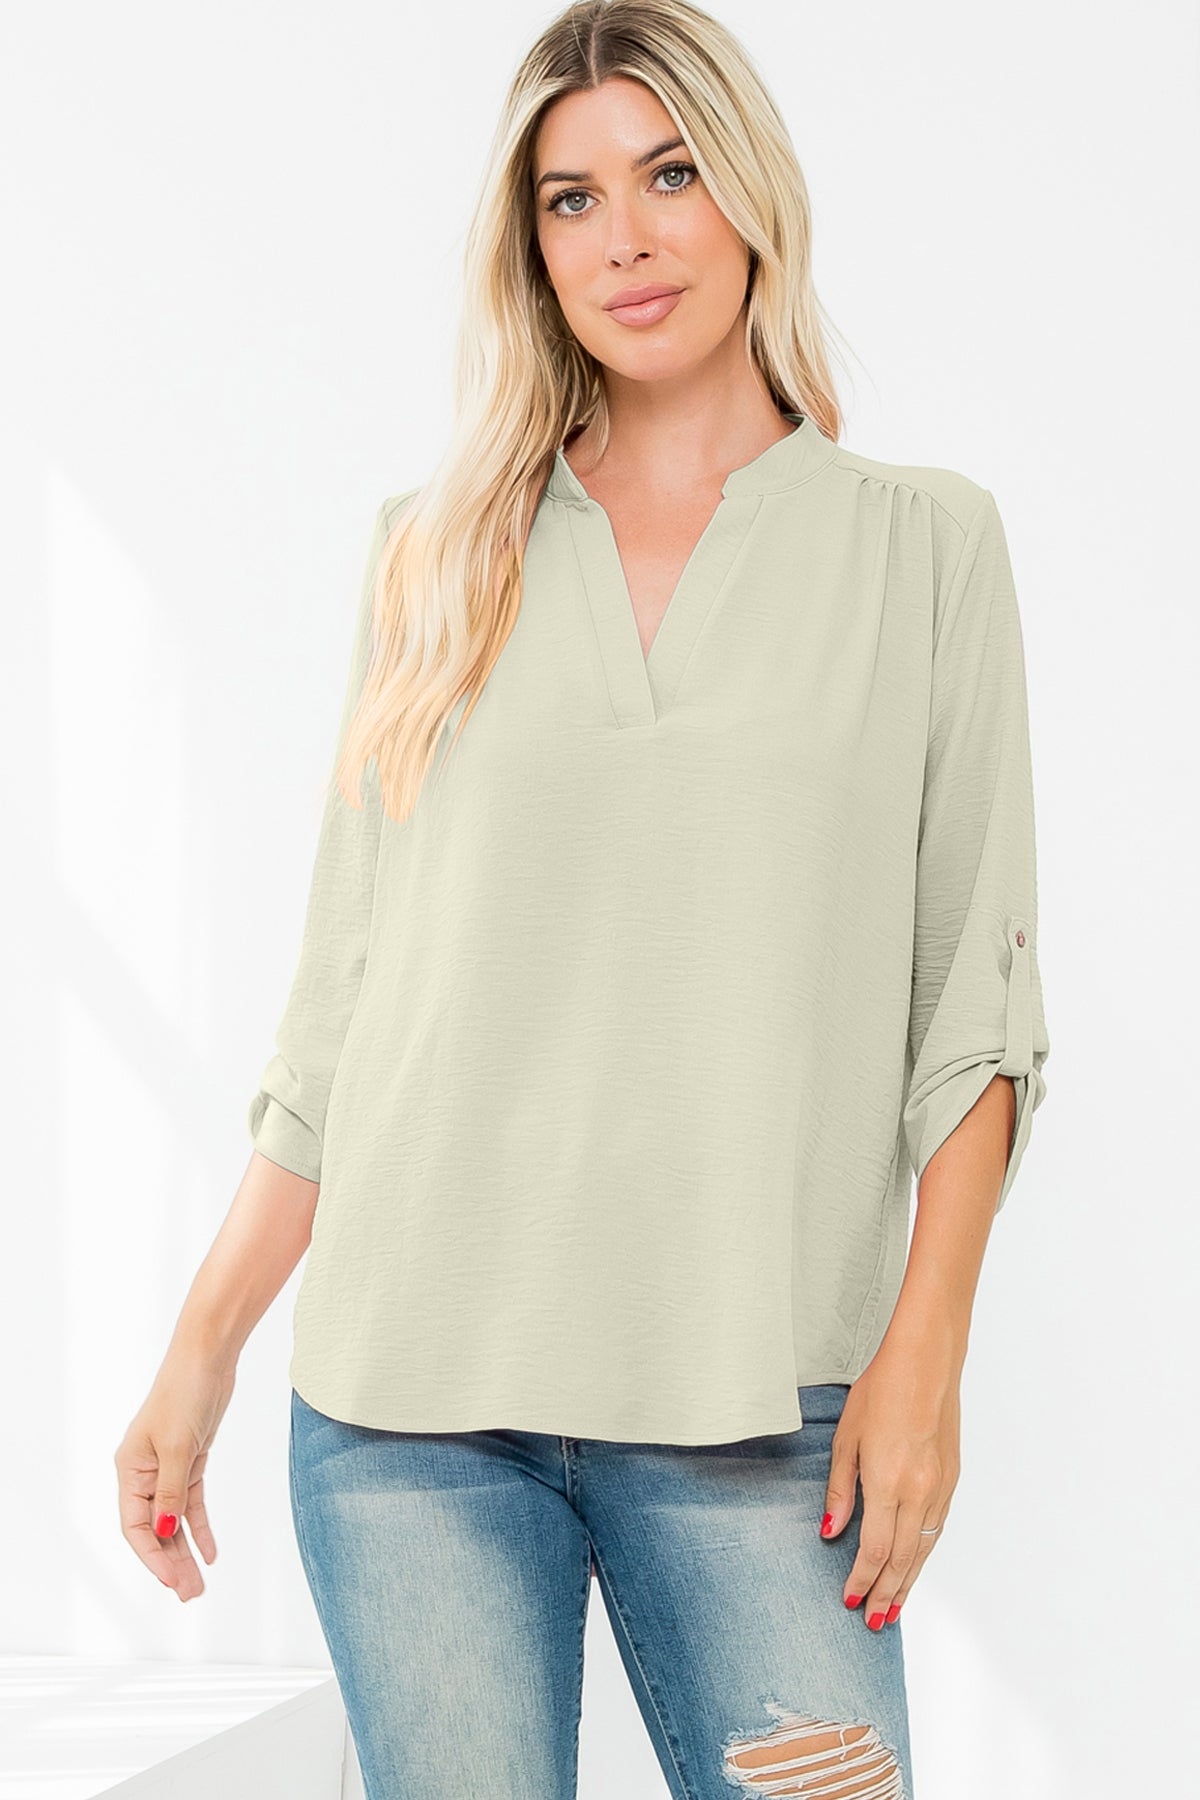 NOTCH NECK 3/4 TAB SLEEVE SOLID AIRFLOW TOP 1-1-1-1